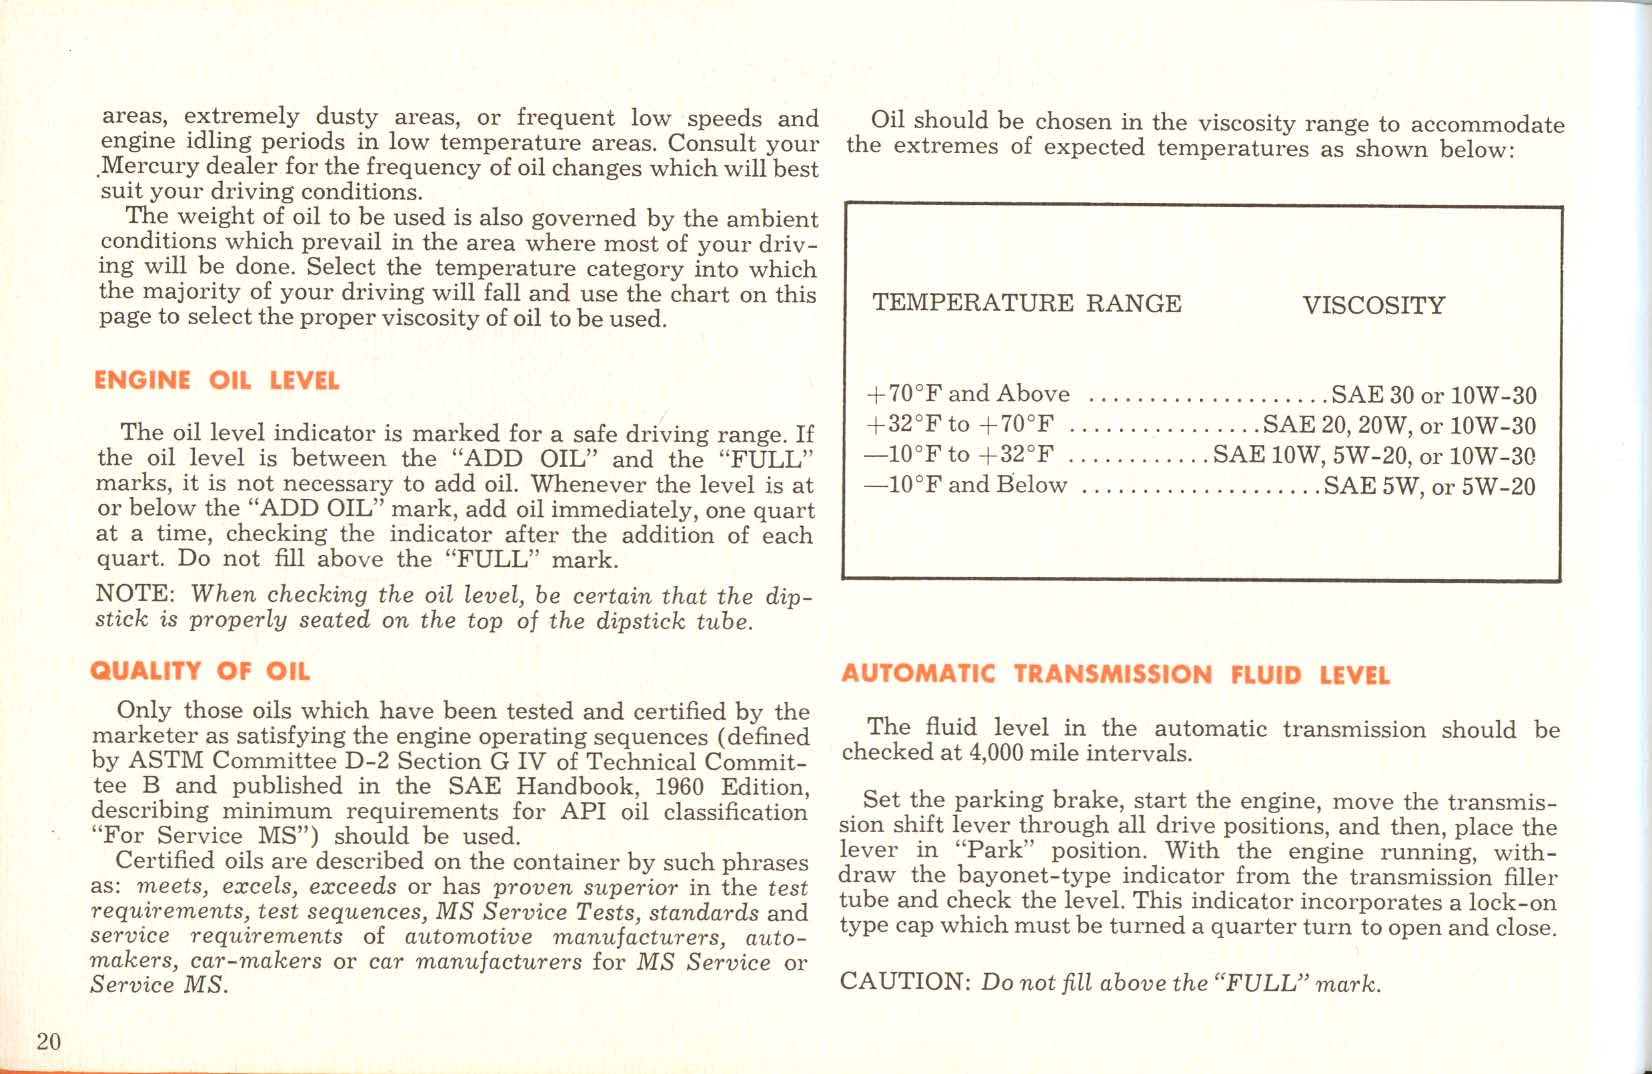 1961 Mercury Owners Manual Page 16